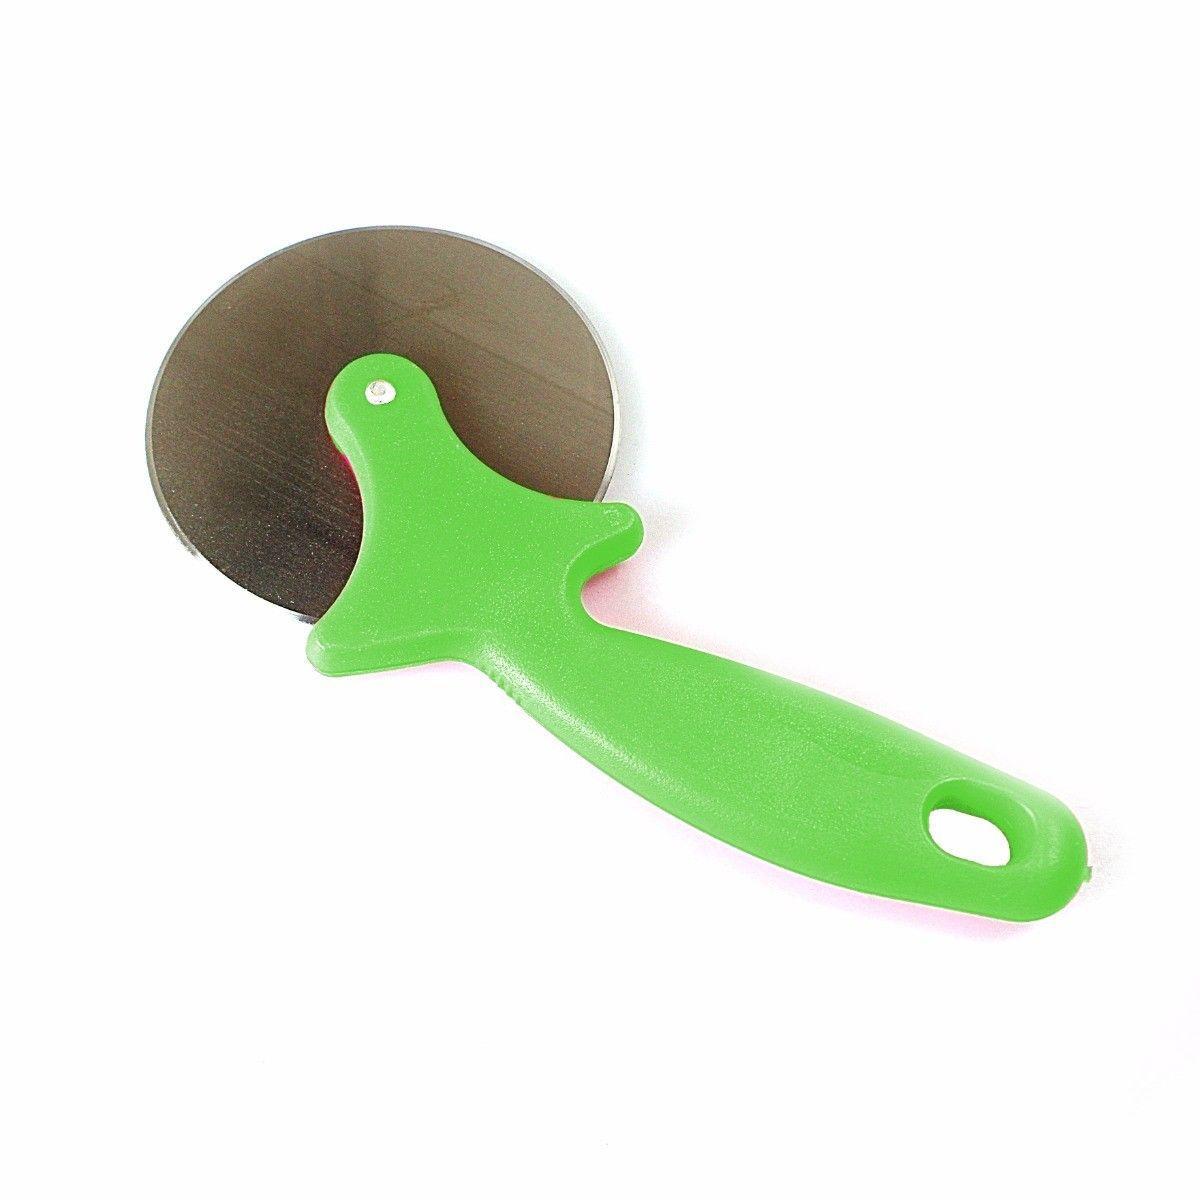 9cm Stainless Steel Pizza Cutter / Slicer Wheel Kitchen Essential 0125 (Large Letter Rate)